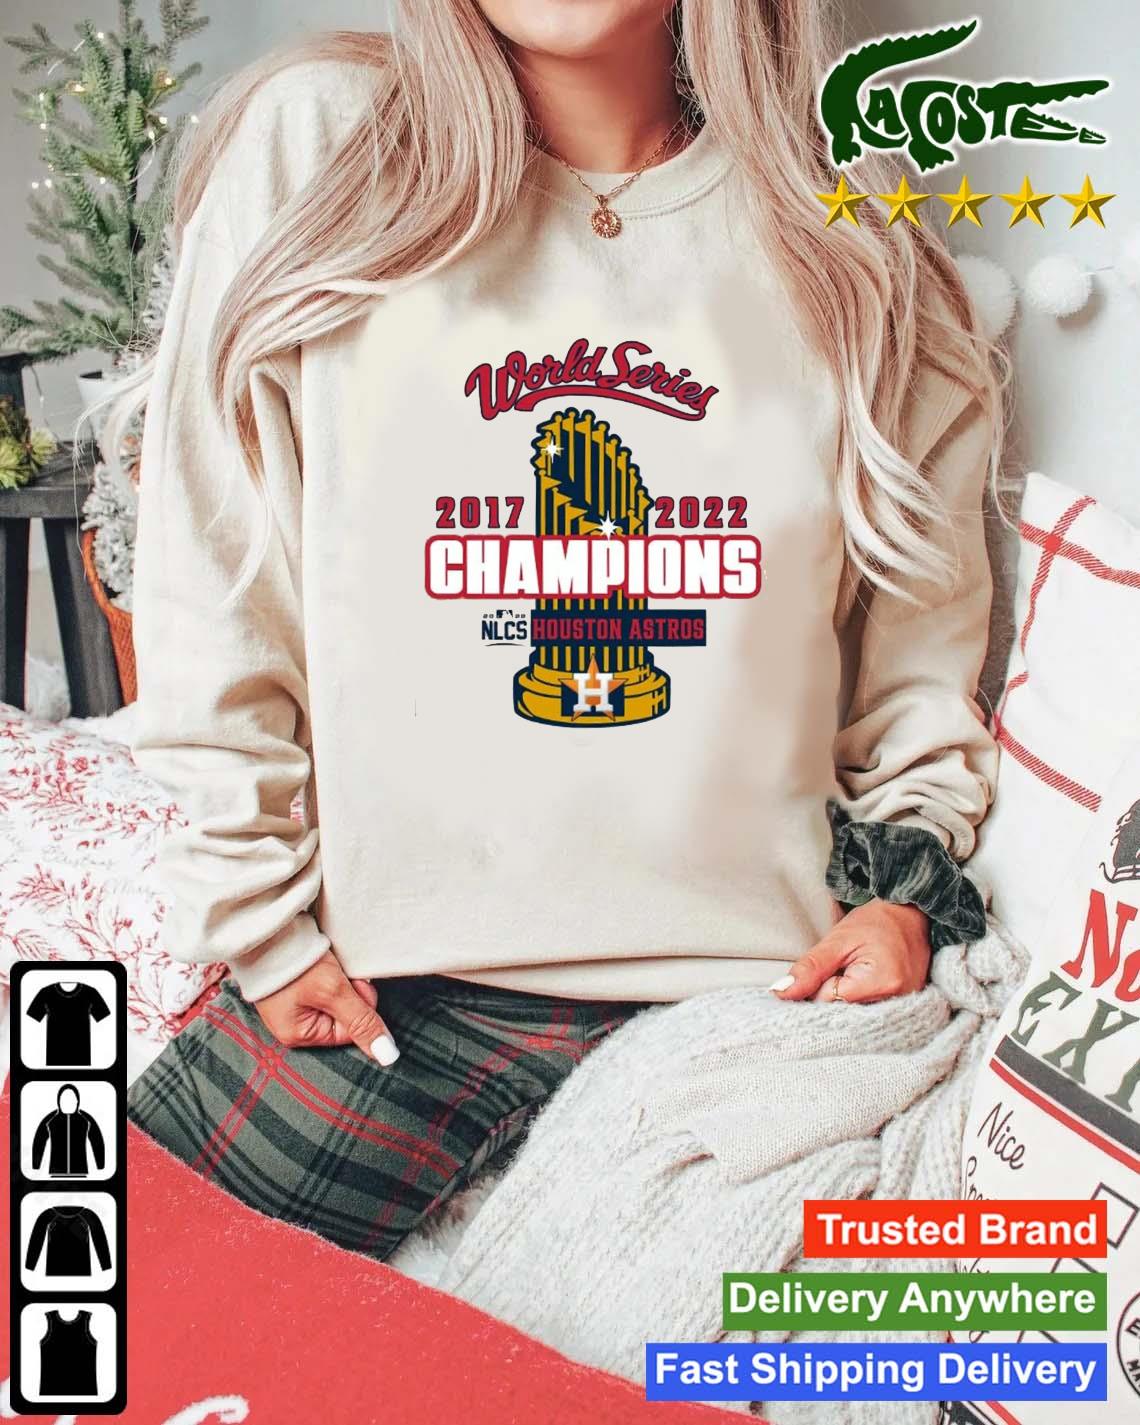 Official Go Astros 2022 World Series Champions Houston Astros 2017 and 2022  shirt, hoodie, sweater, long sleeve and tank top